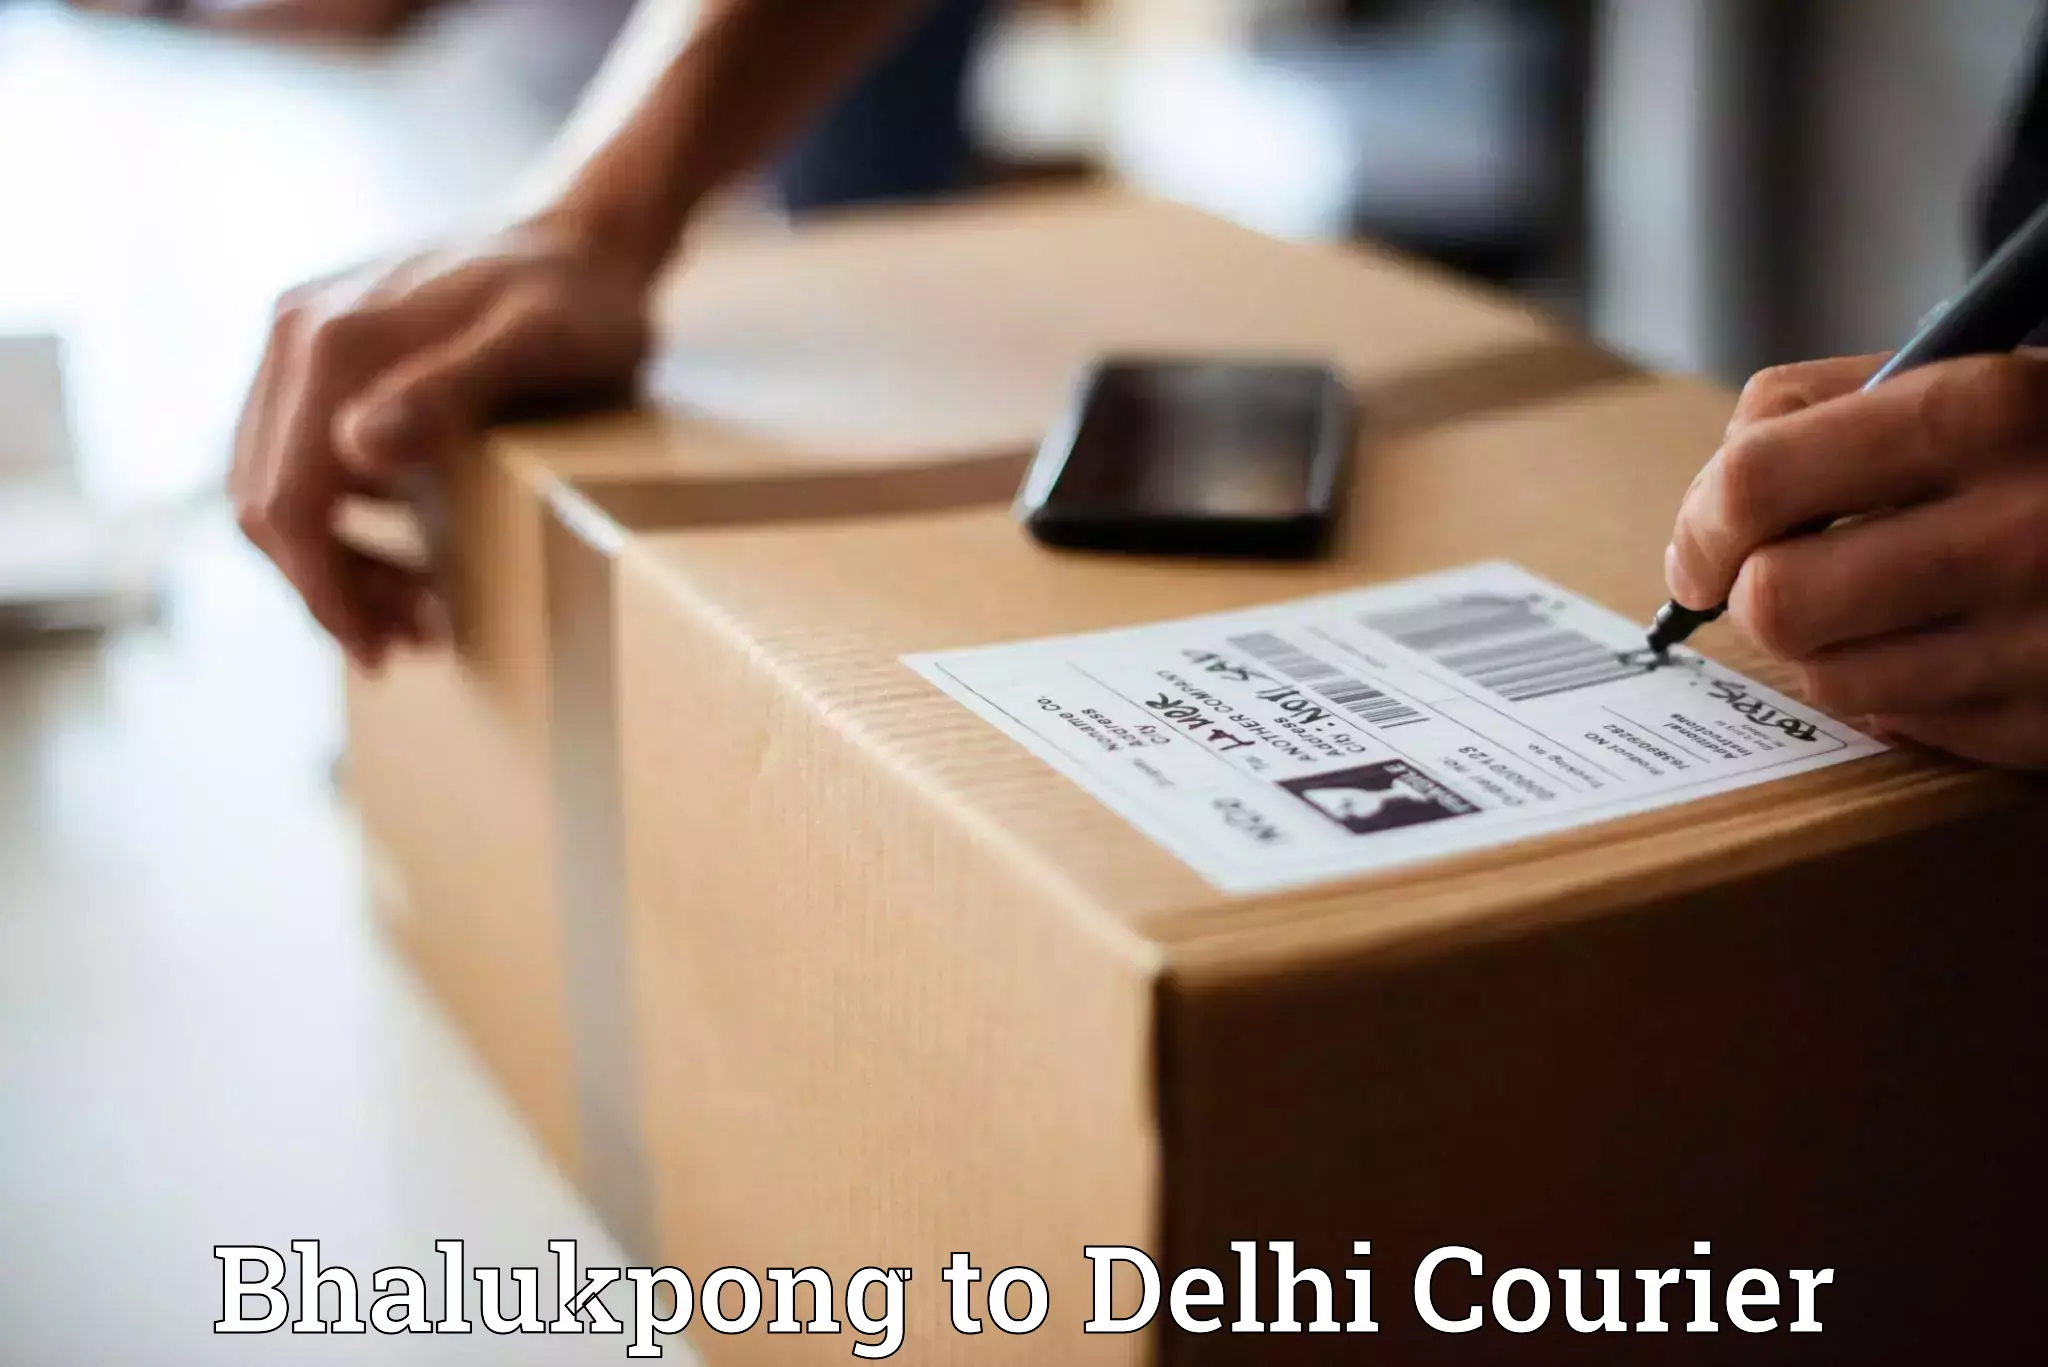 Advanced shipping network Bhalukpong to NCR